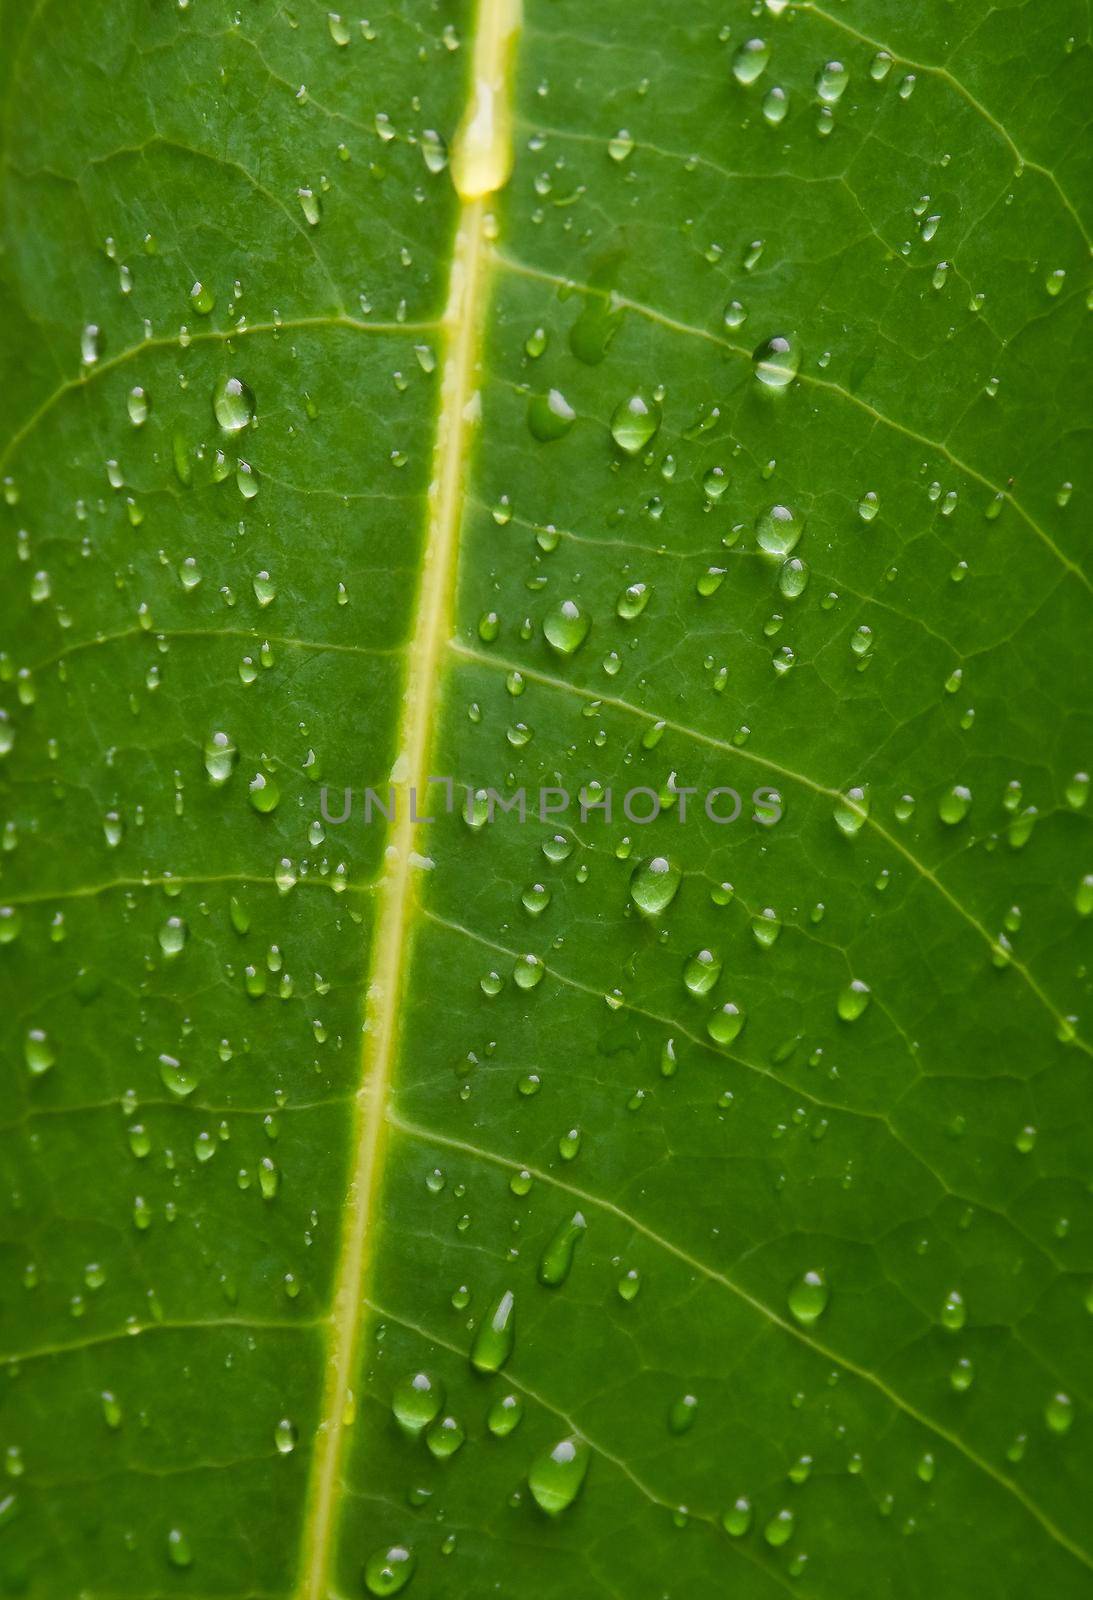 Texture of green leaf veins with water drops by BreakingTheWalls